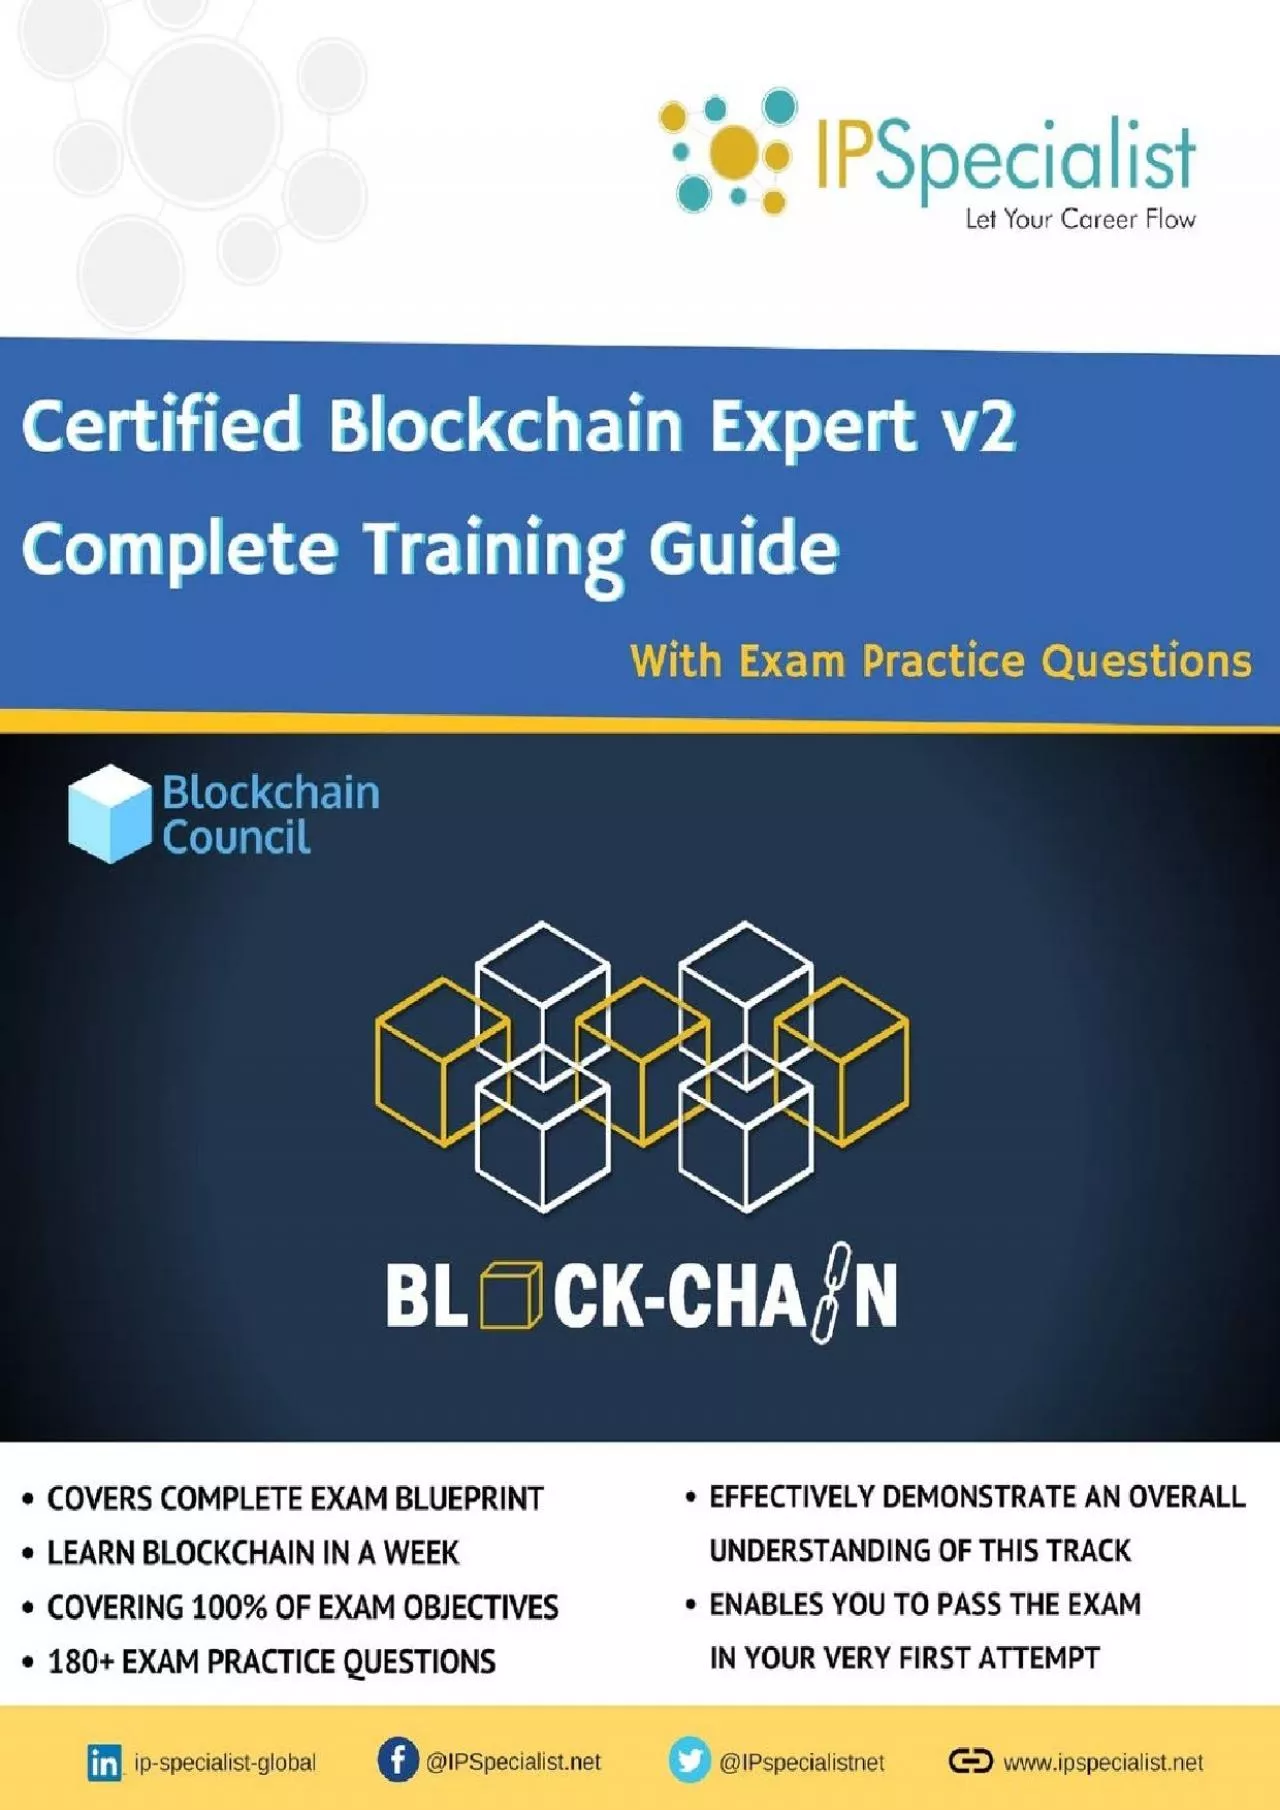 (BOOK)-Certified Blockchain Expert v2 Complete Training Guide With Exam Practice Questions